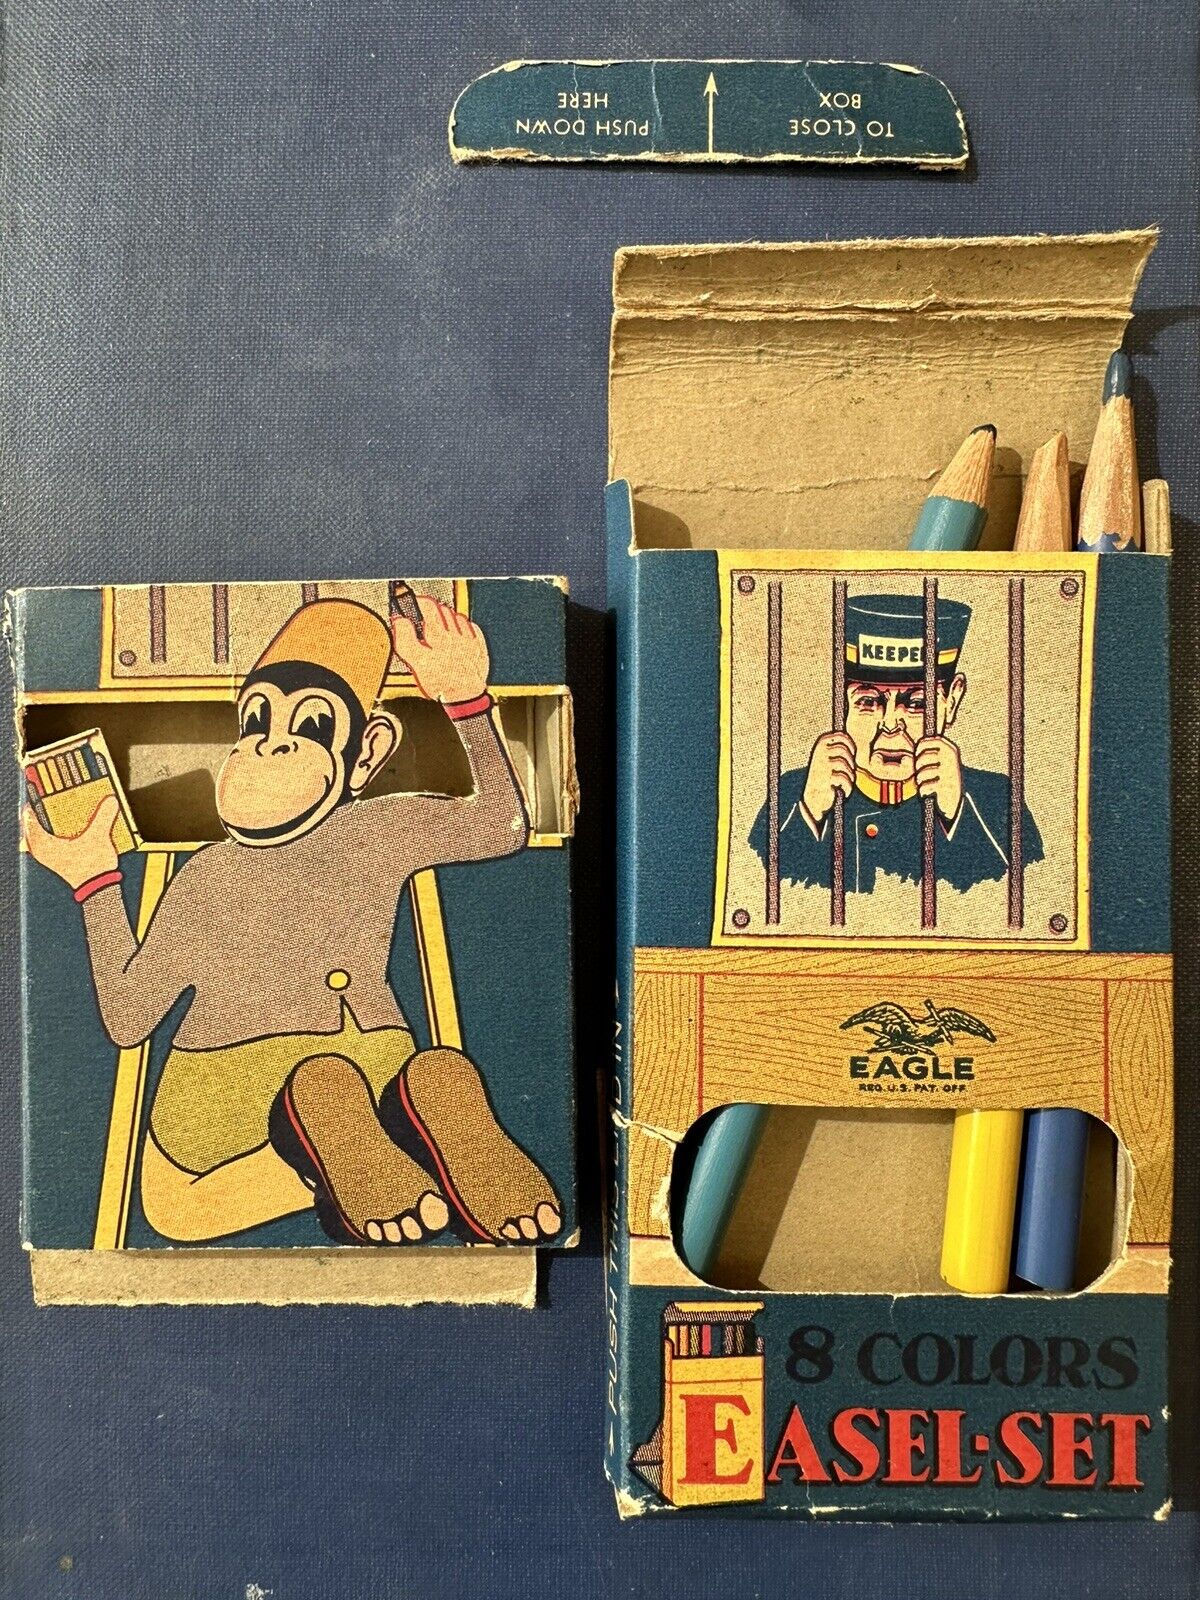 Vintage 1930s 1933 Eagle colored pencils lithographed monkey Easle box ( As is )